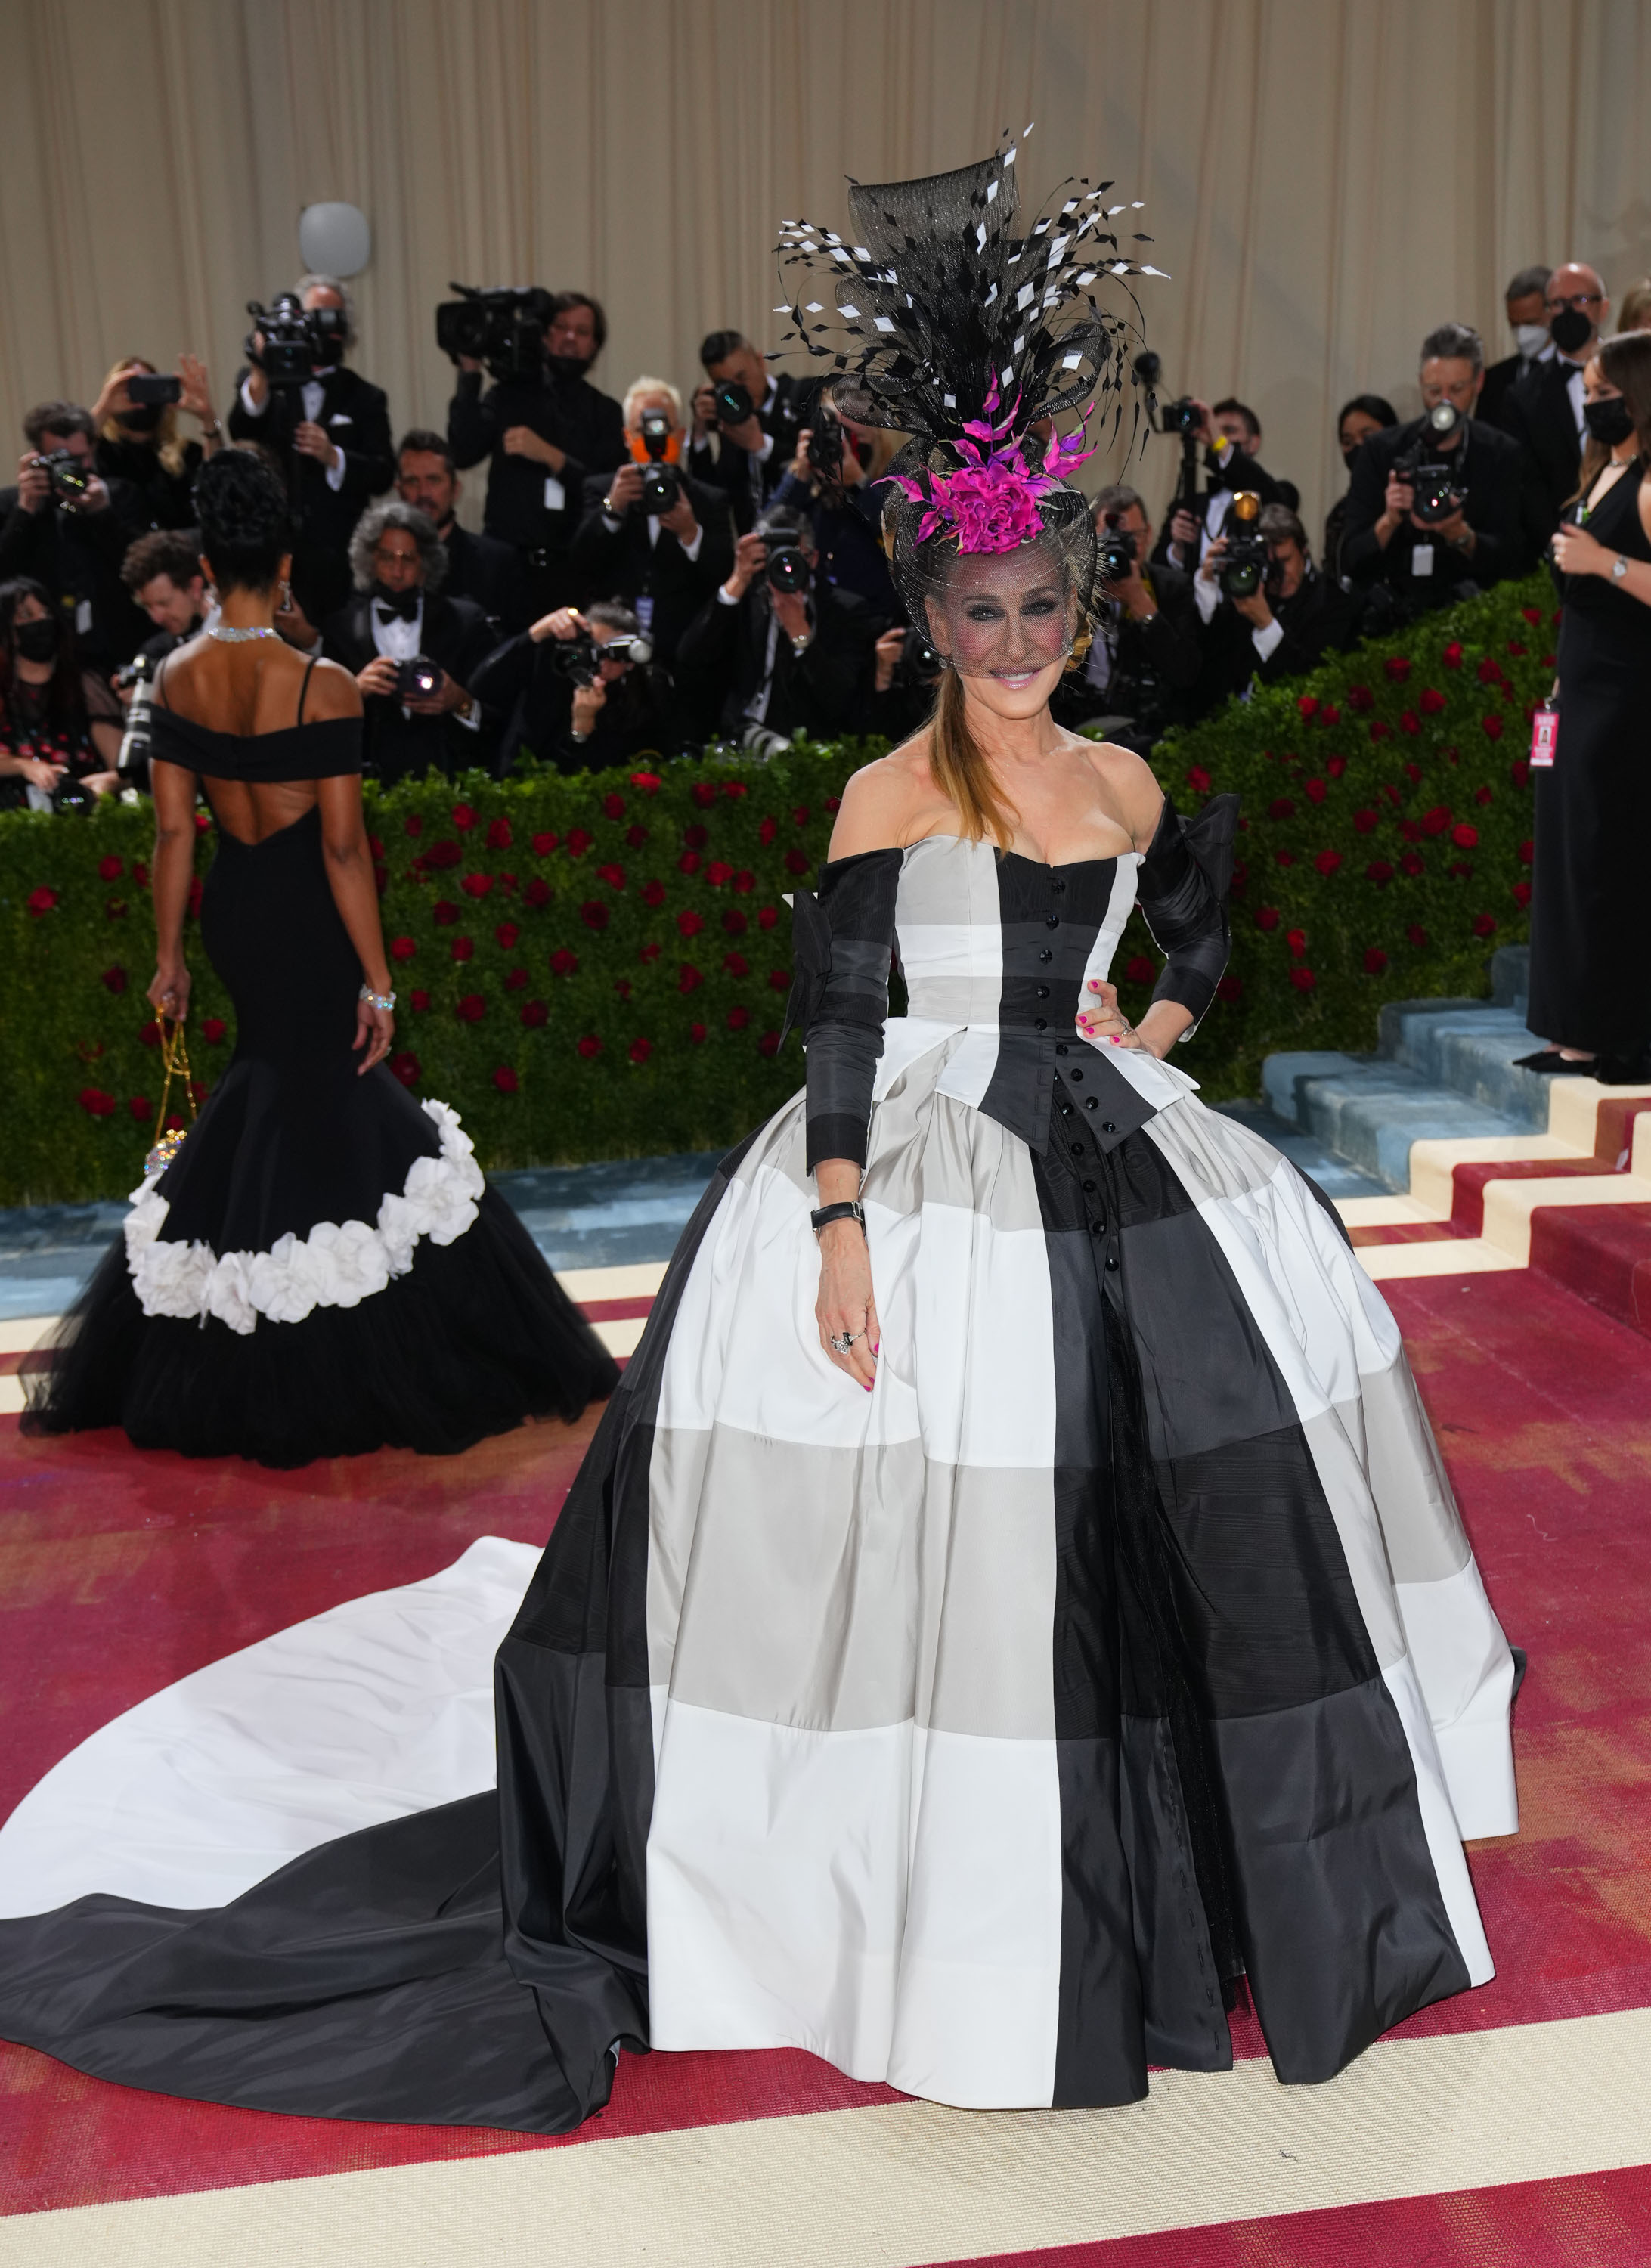 Sarah Jessica Parker attends the Met Gala with the theme, "In America: An Anthology of Fashion," at The Metropolitan Museum of Art on May 2, 2022, in New York City. | Source: Getty Images